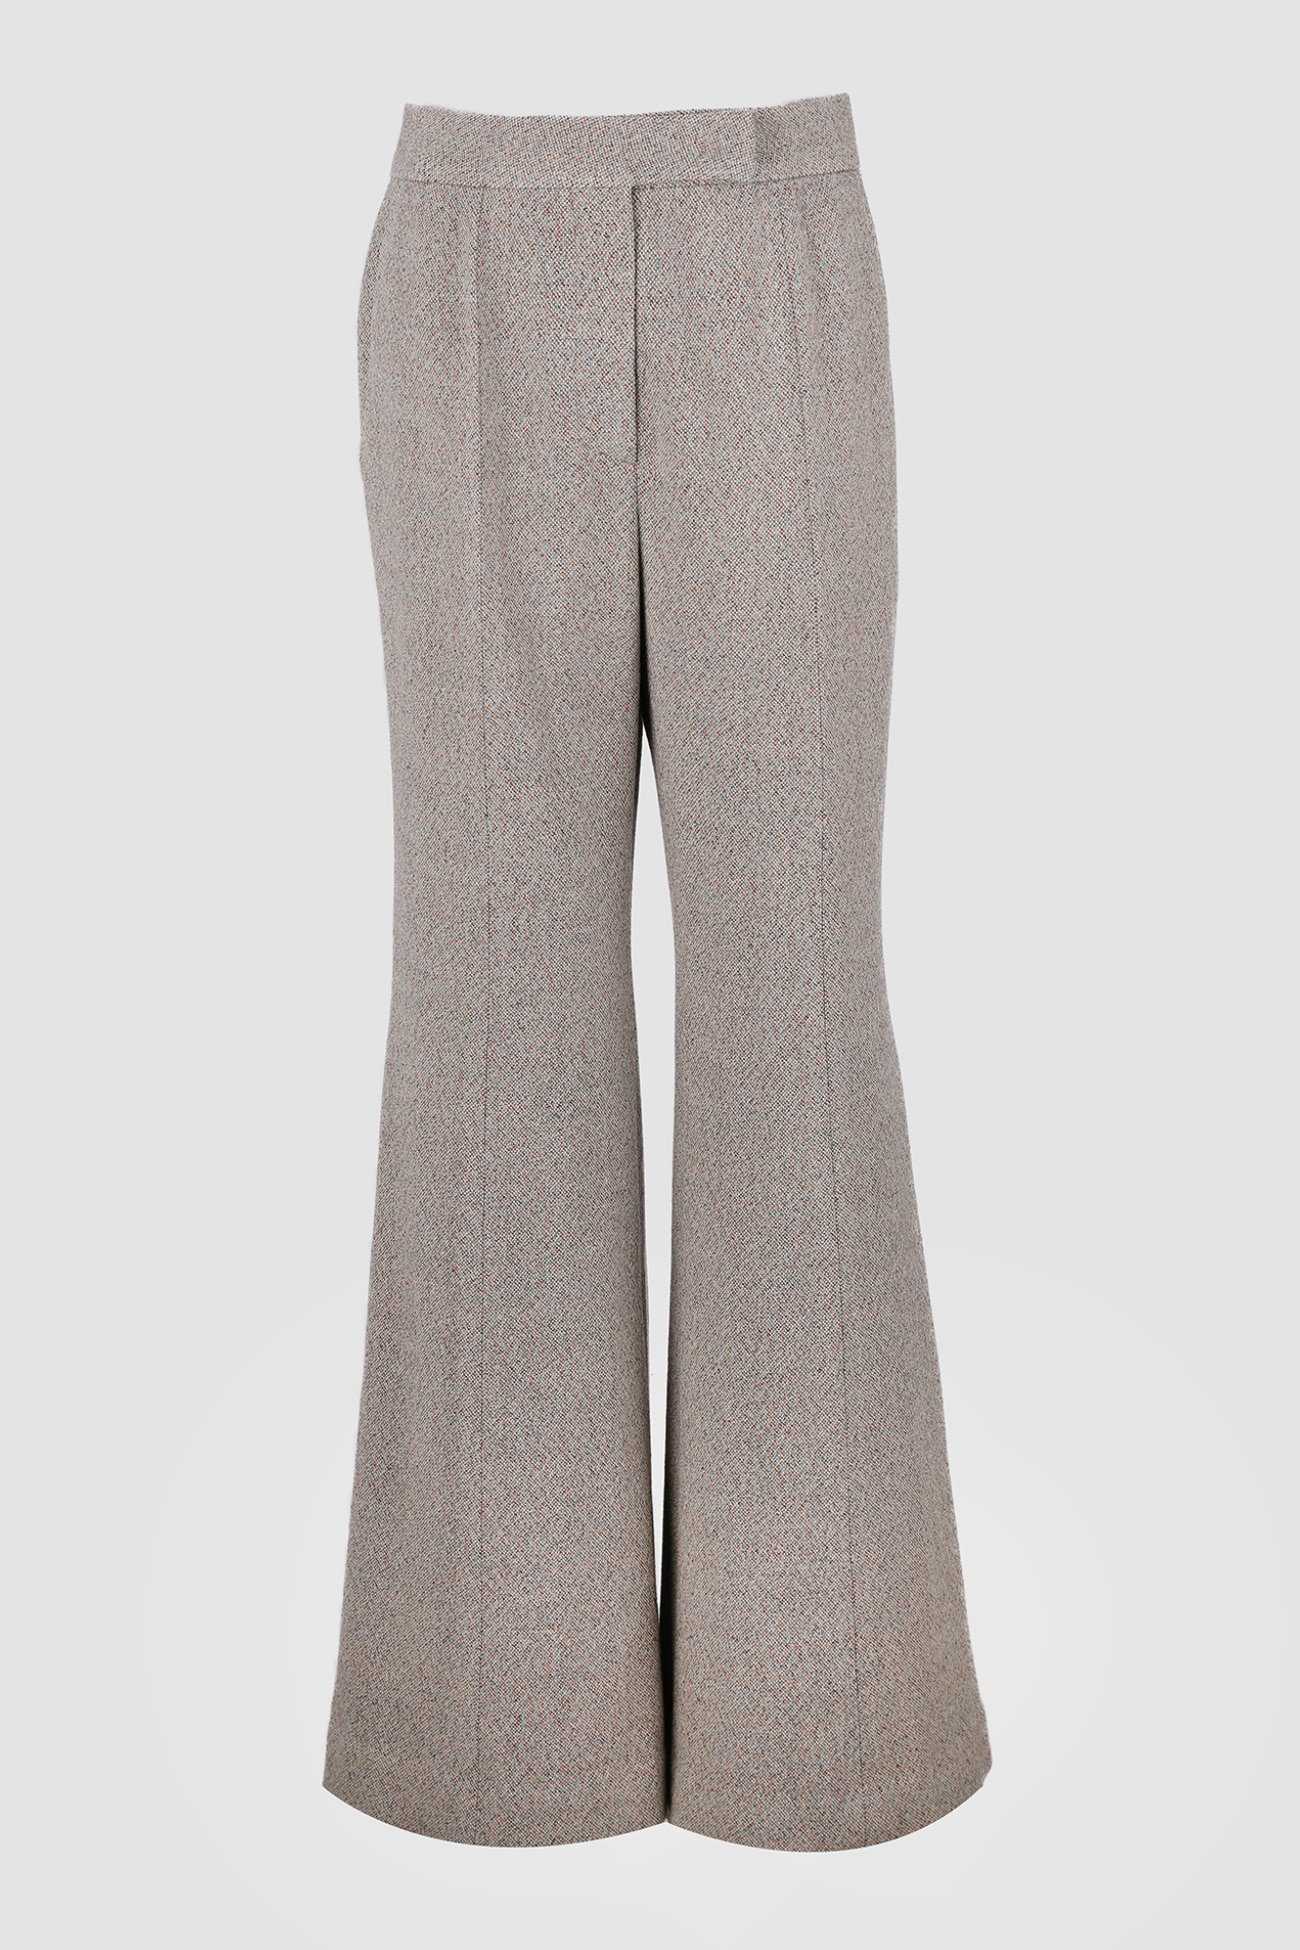 HIGH QUALITY LINE - Leda flared italy wool Trousers (TWEED)